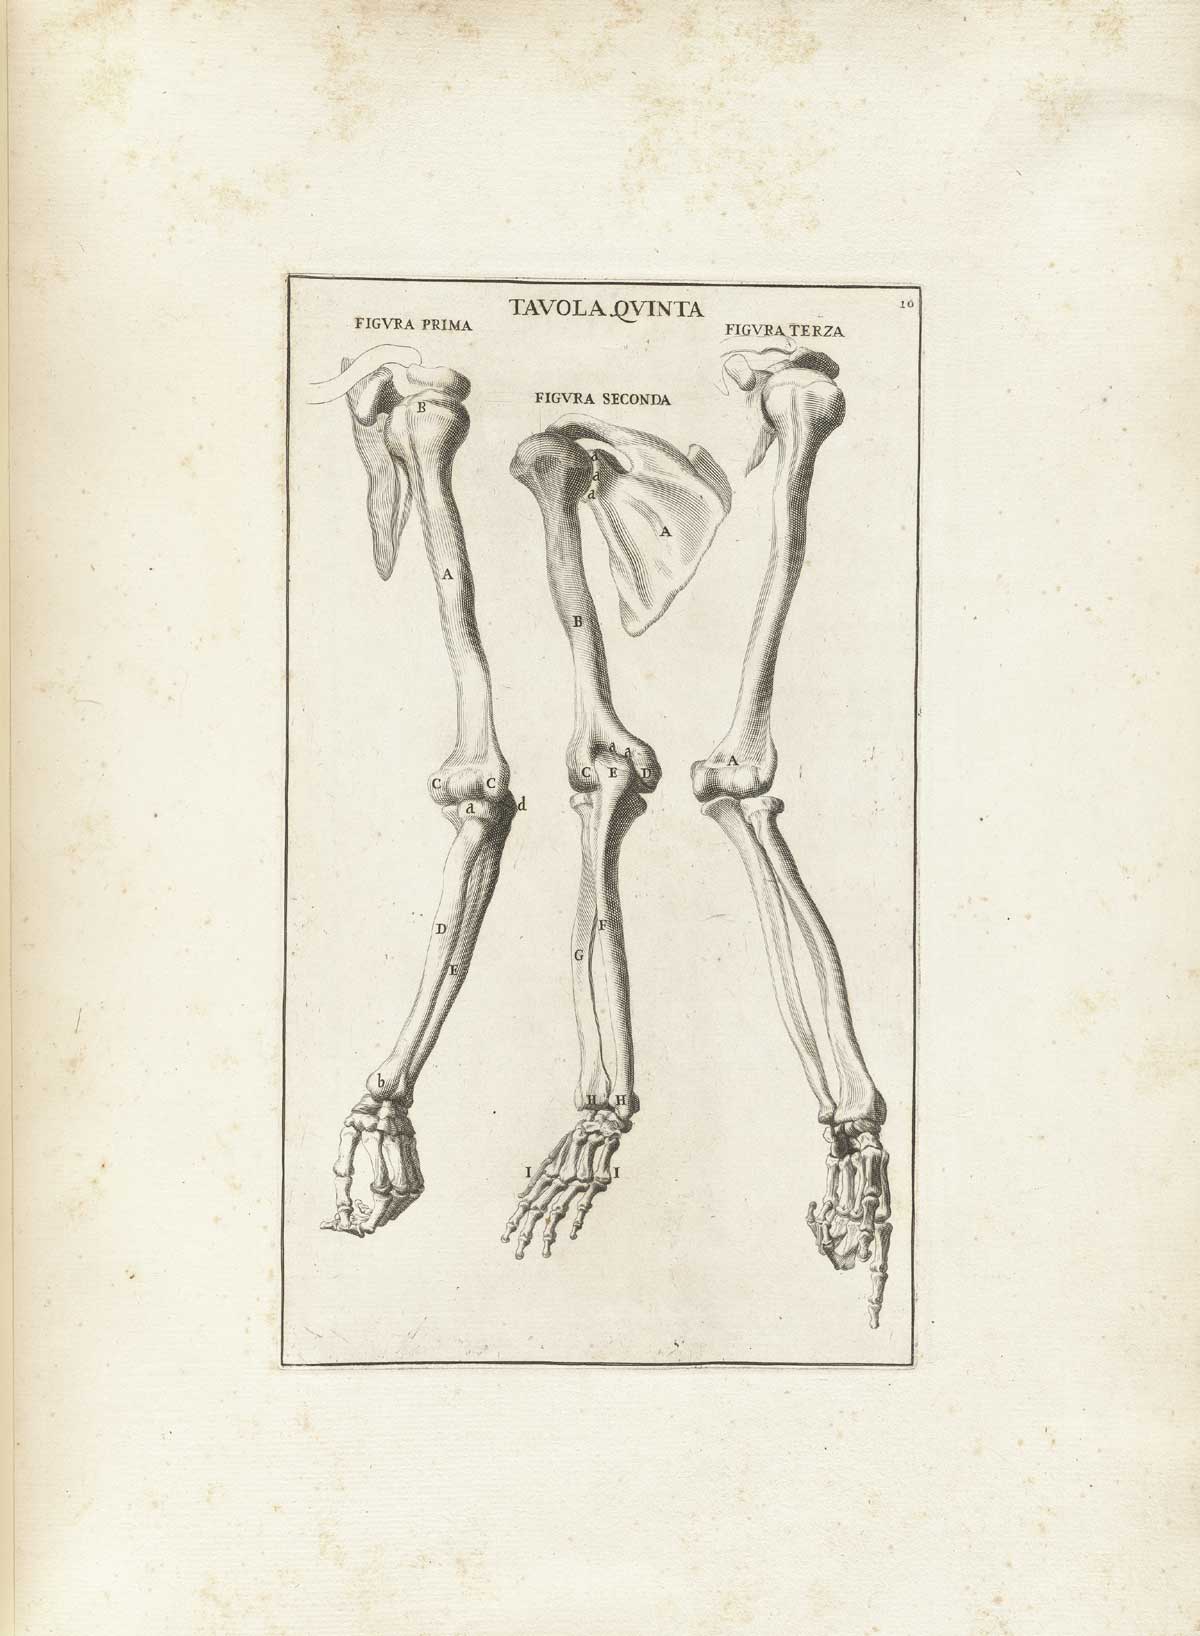 Engraving of three skeleton arms and hands viewed from the front back and sides, from Bernardino Genga’s Anatomia per uso et intelligenza del disegno, NLM Call no.: WZ 250 G329an 1691.